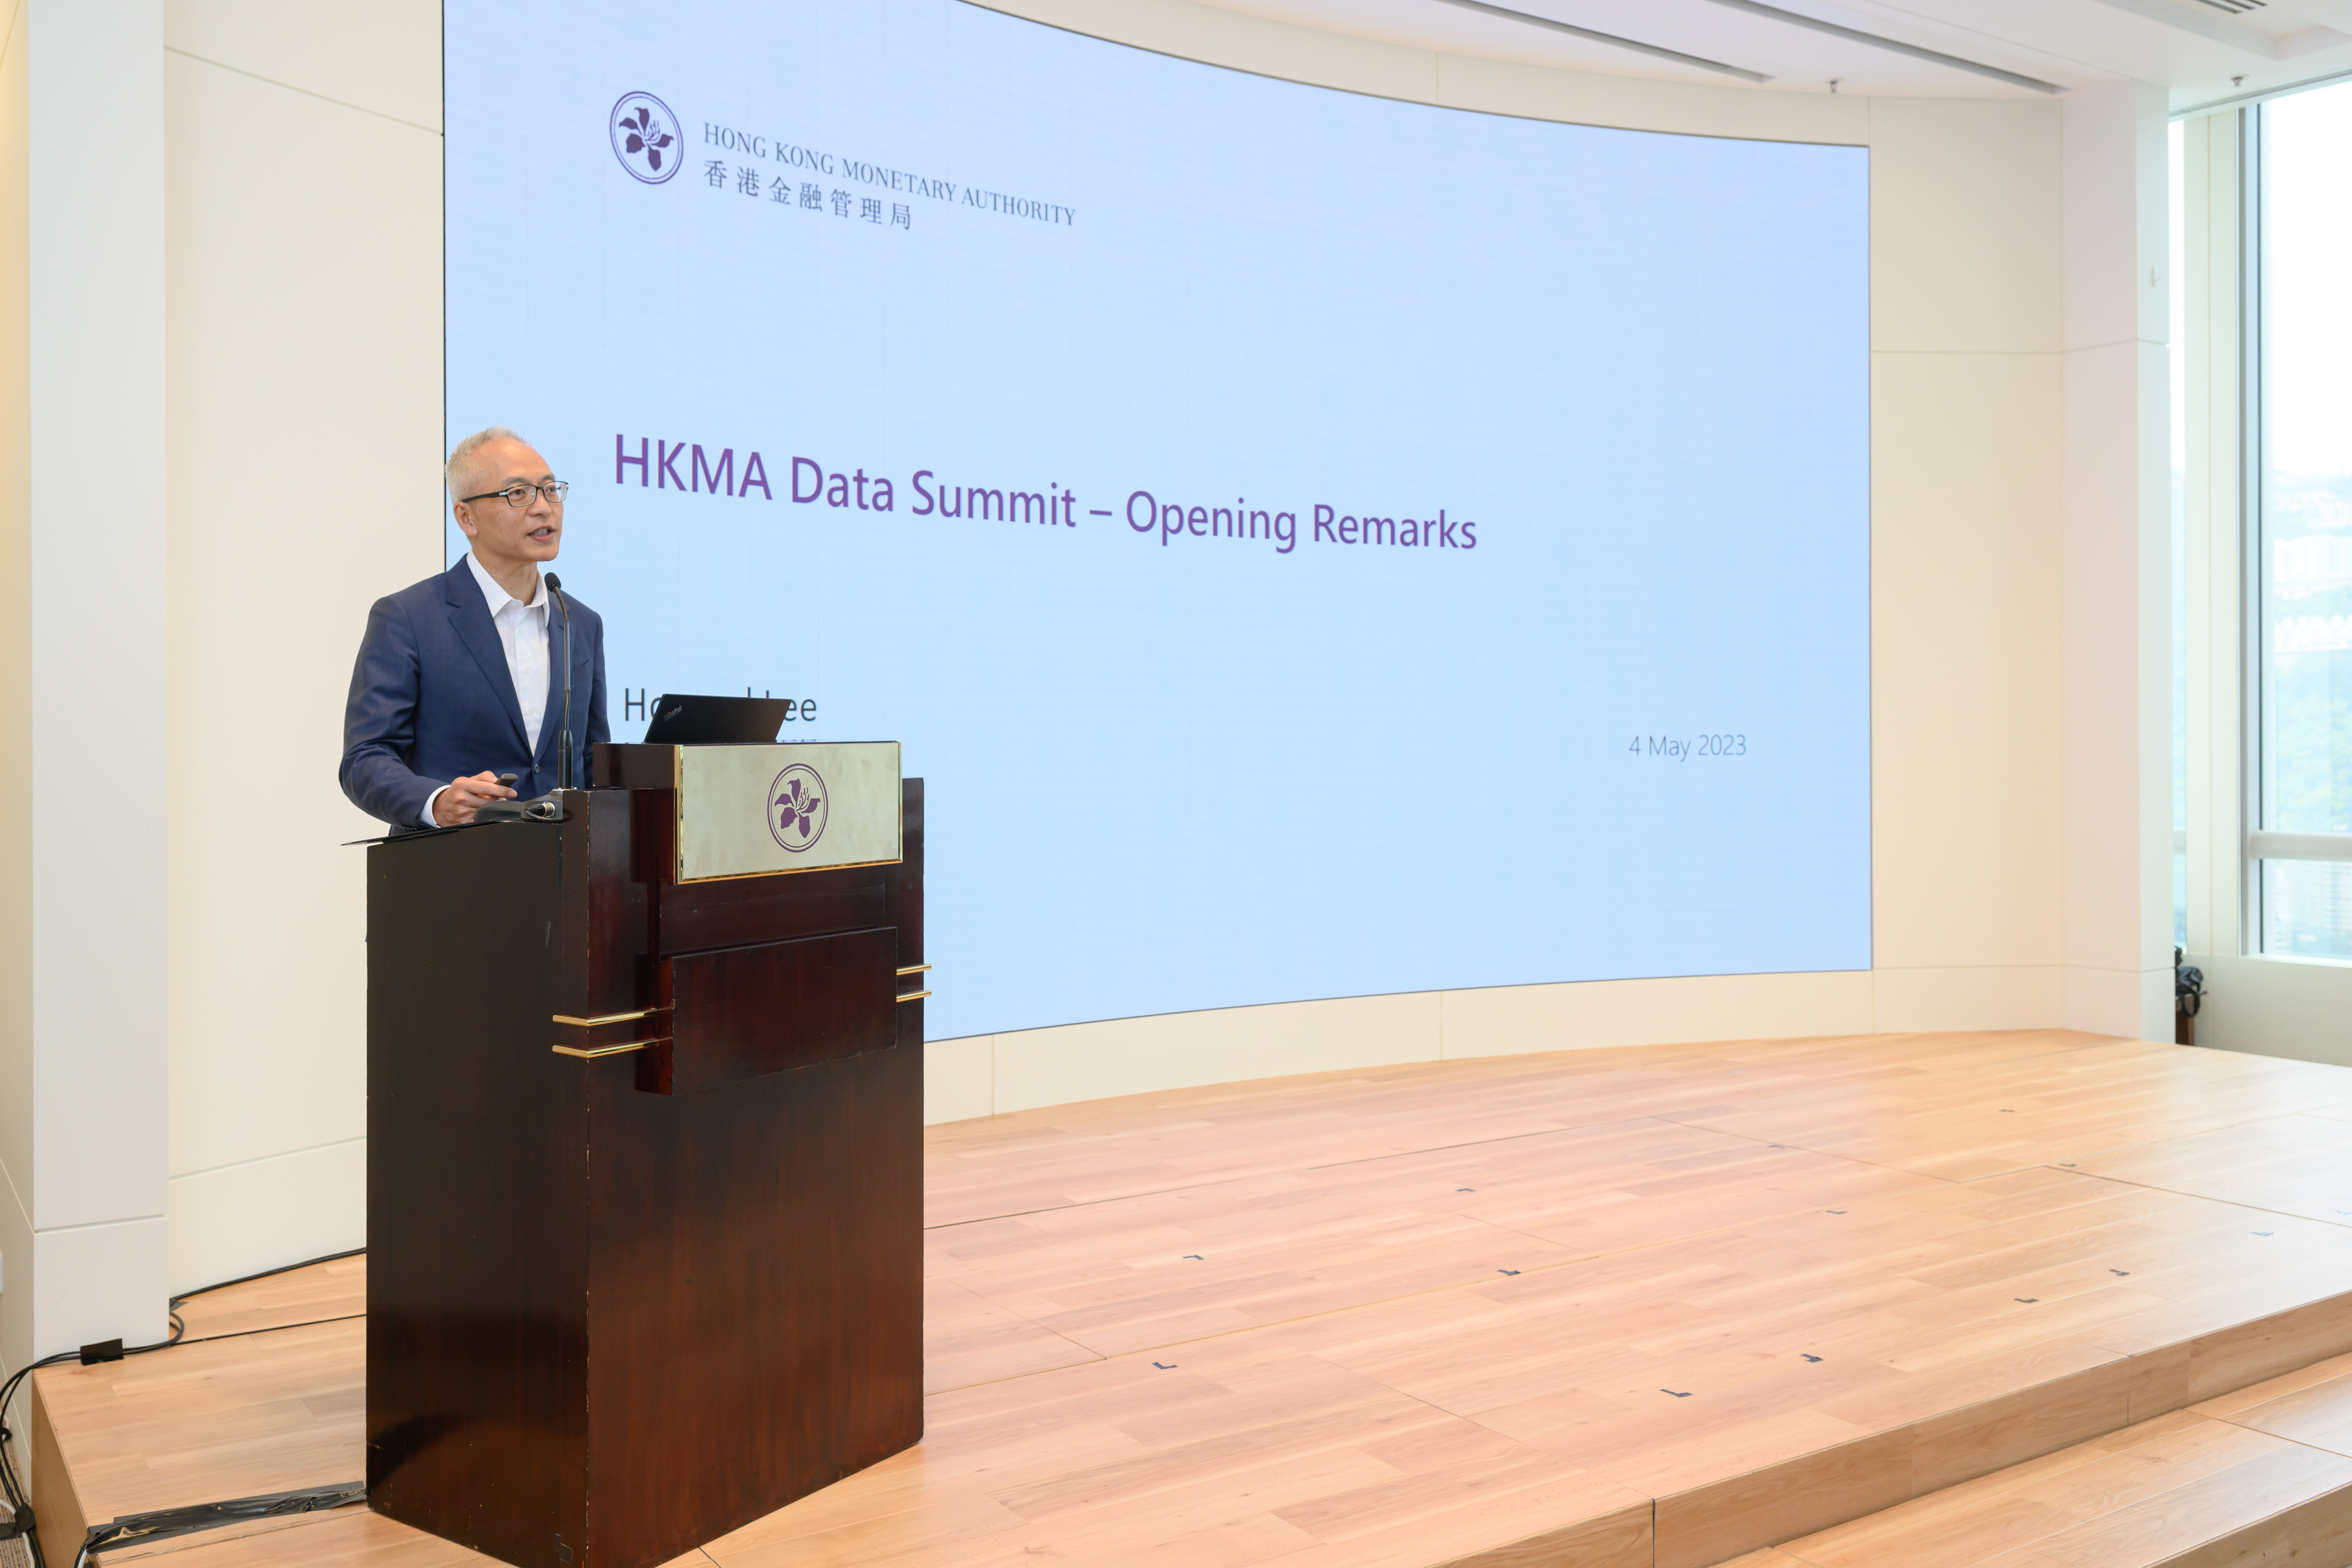 MMr Howard Lee, Deputy Chief Executive of the HKMA, delivers the opening remarks at the Summit.